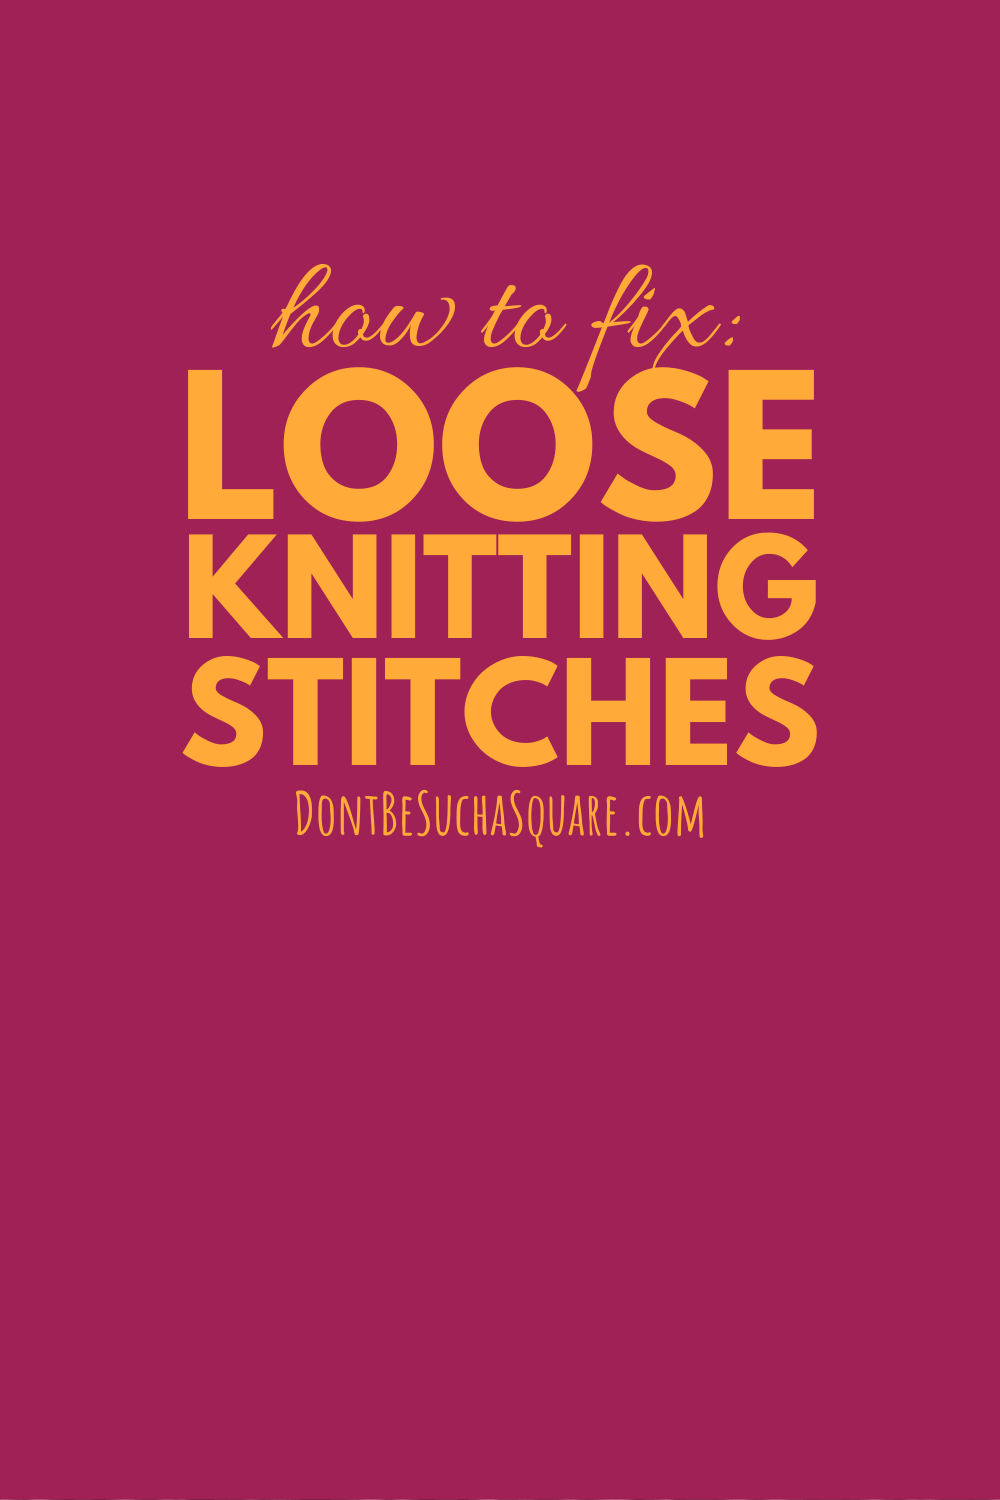 How to fix Loose Knitting Stitches